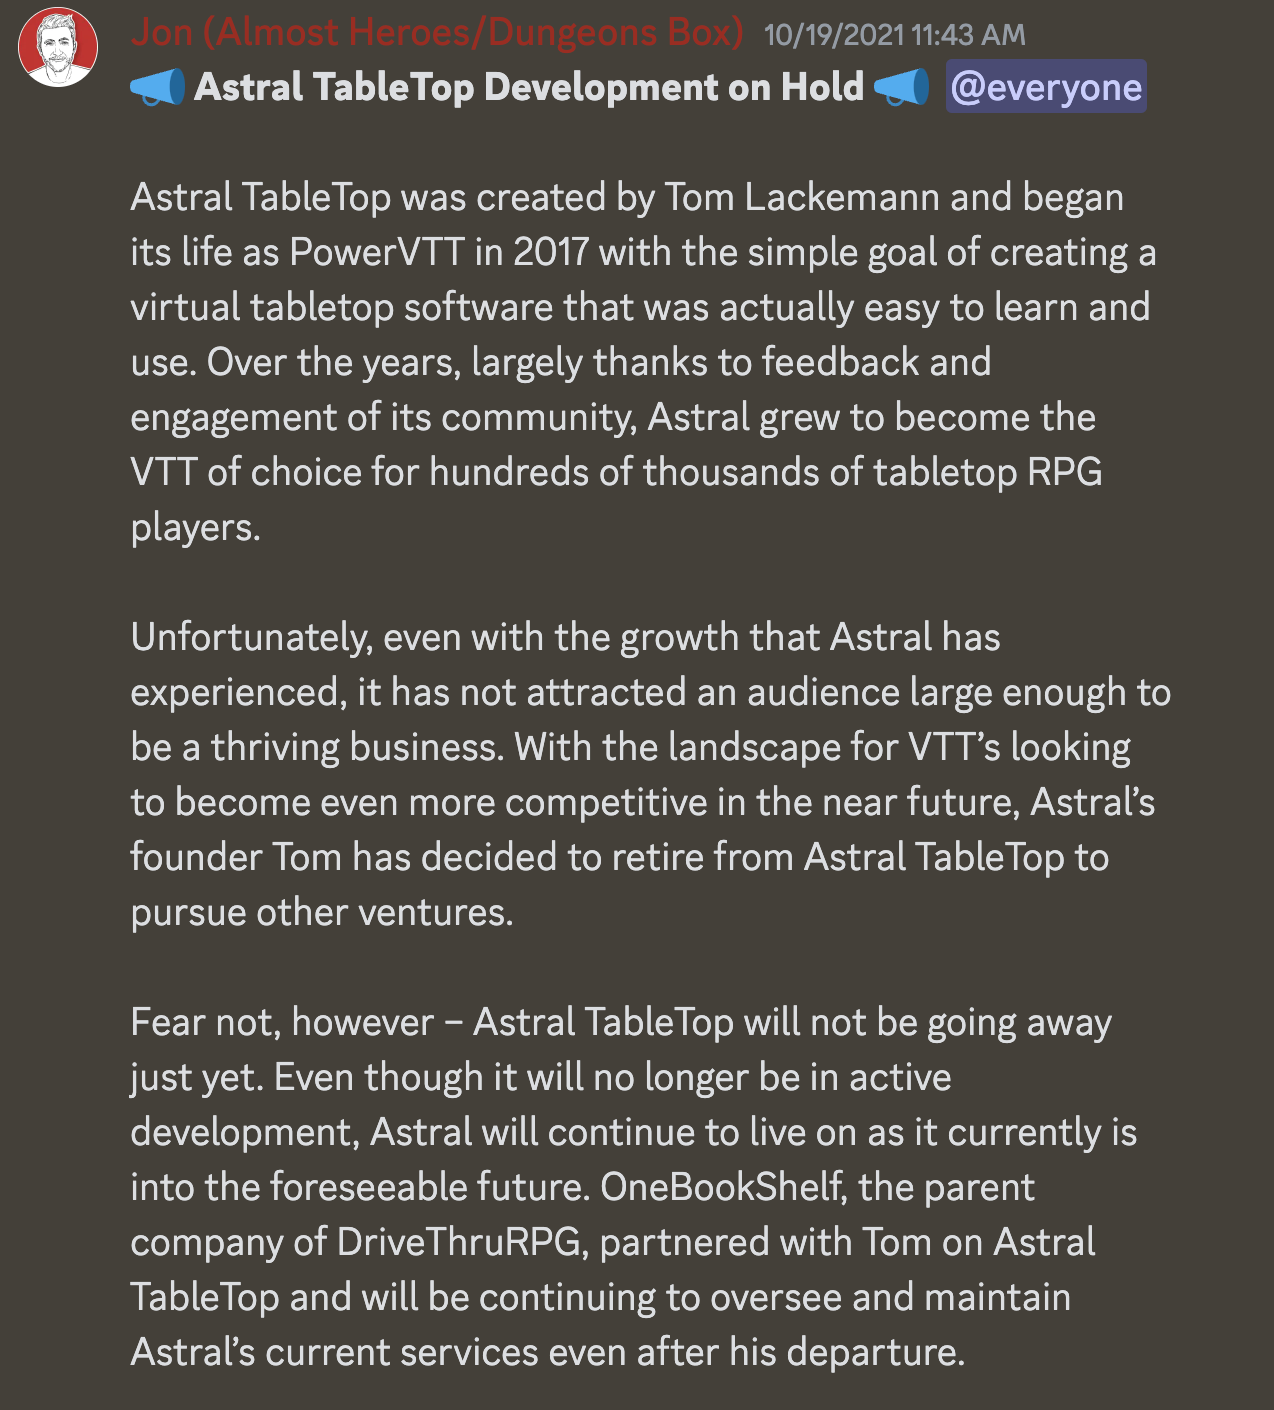 The following Discord screenshot message reads: 📣 Astral TableTop Development on Hold 📣  @everyone  Astral TableTop was created by Tom Lackemann and began its life as PowerVTT in 2017 with the simple goal of creating a virtual tabletop software that was actually easy to learn and use. Over the years, largely thanks to feedback and engagement of its community, Astral grew to become the VTT of choice for hundreds of thousands of tabletop RPG players.  Unfortunately, even with the growth that Astral has experienced, it has not attracted an audience large enough to be a thriving business. With the landscape for VTT’s looking to become even more competitive in the near future, Astral’s founder Tom has decided to retire from Astral TableTop to pursue other ventures.  Fear not, however – Astral TableTop will not be going away just yet. Even though it will no longer be in active development, Astral will continue to live on as it currently is into the foreseeable future. OneBookShelf, the parent company of DriveThruRPG, partnered with Tom on Astral TableTop and will be continuing to oversee and maintain Astral’s current services even after his departure.